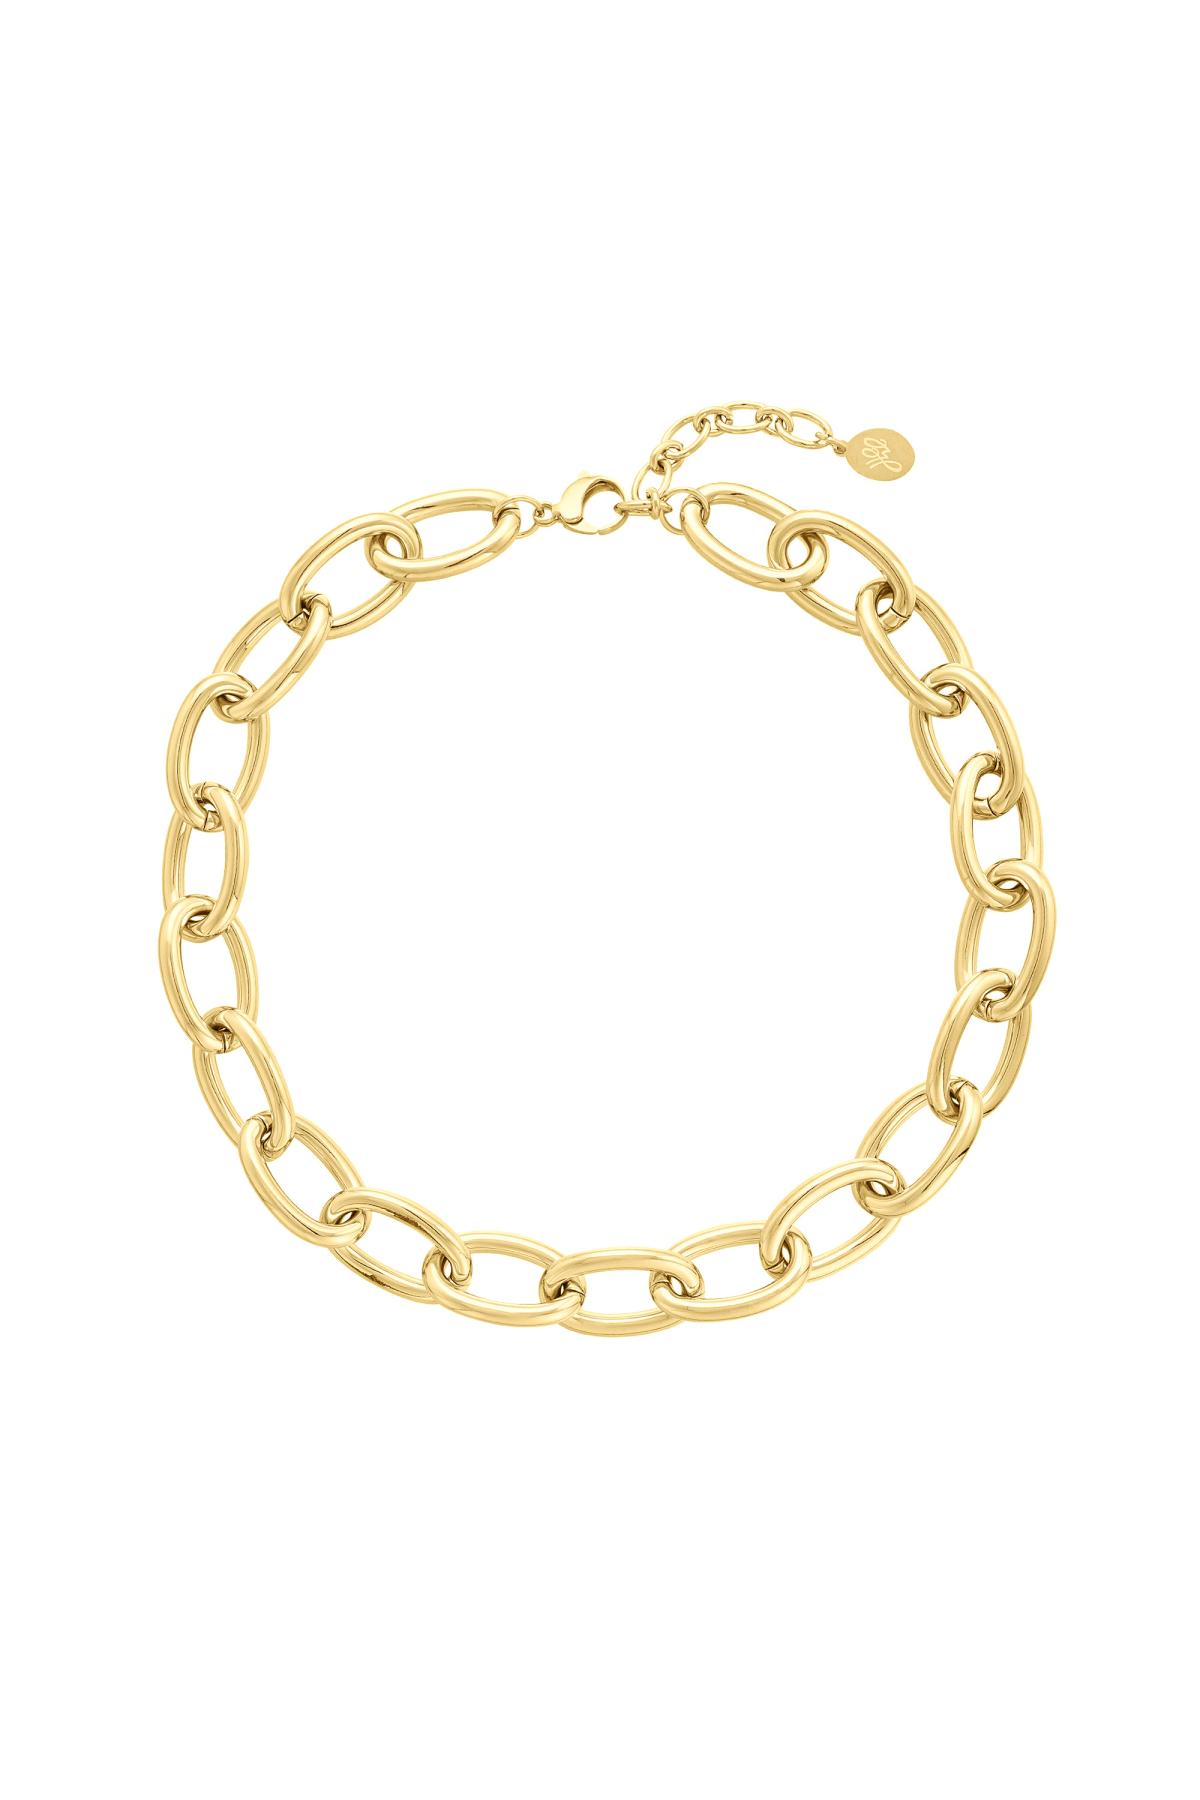 Chunky chain necklace with large links Gold Stainless Steel h5 